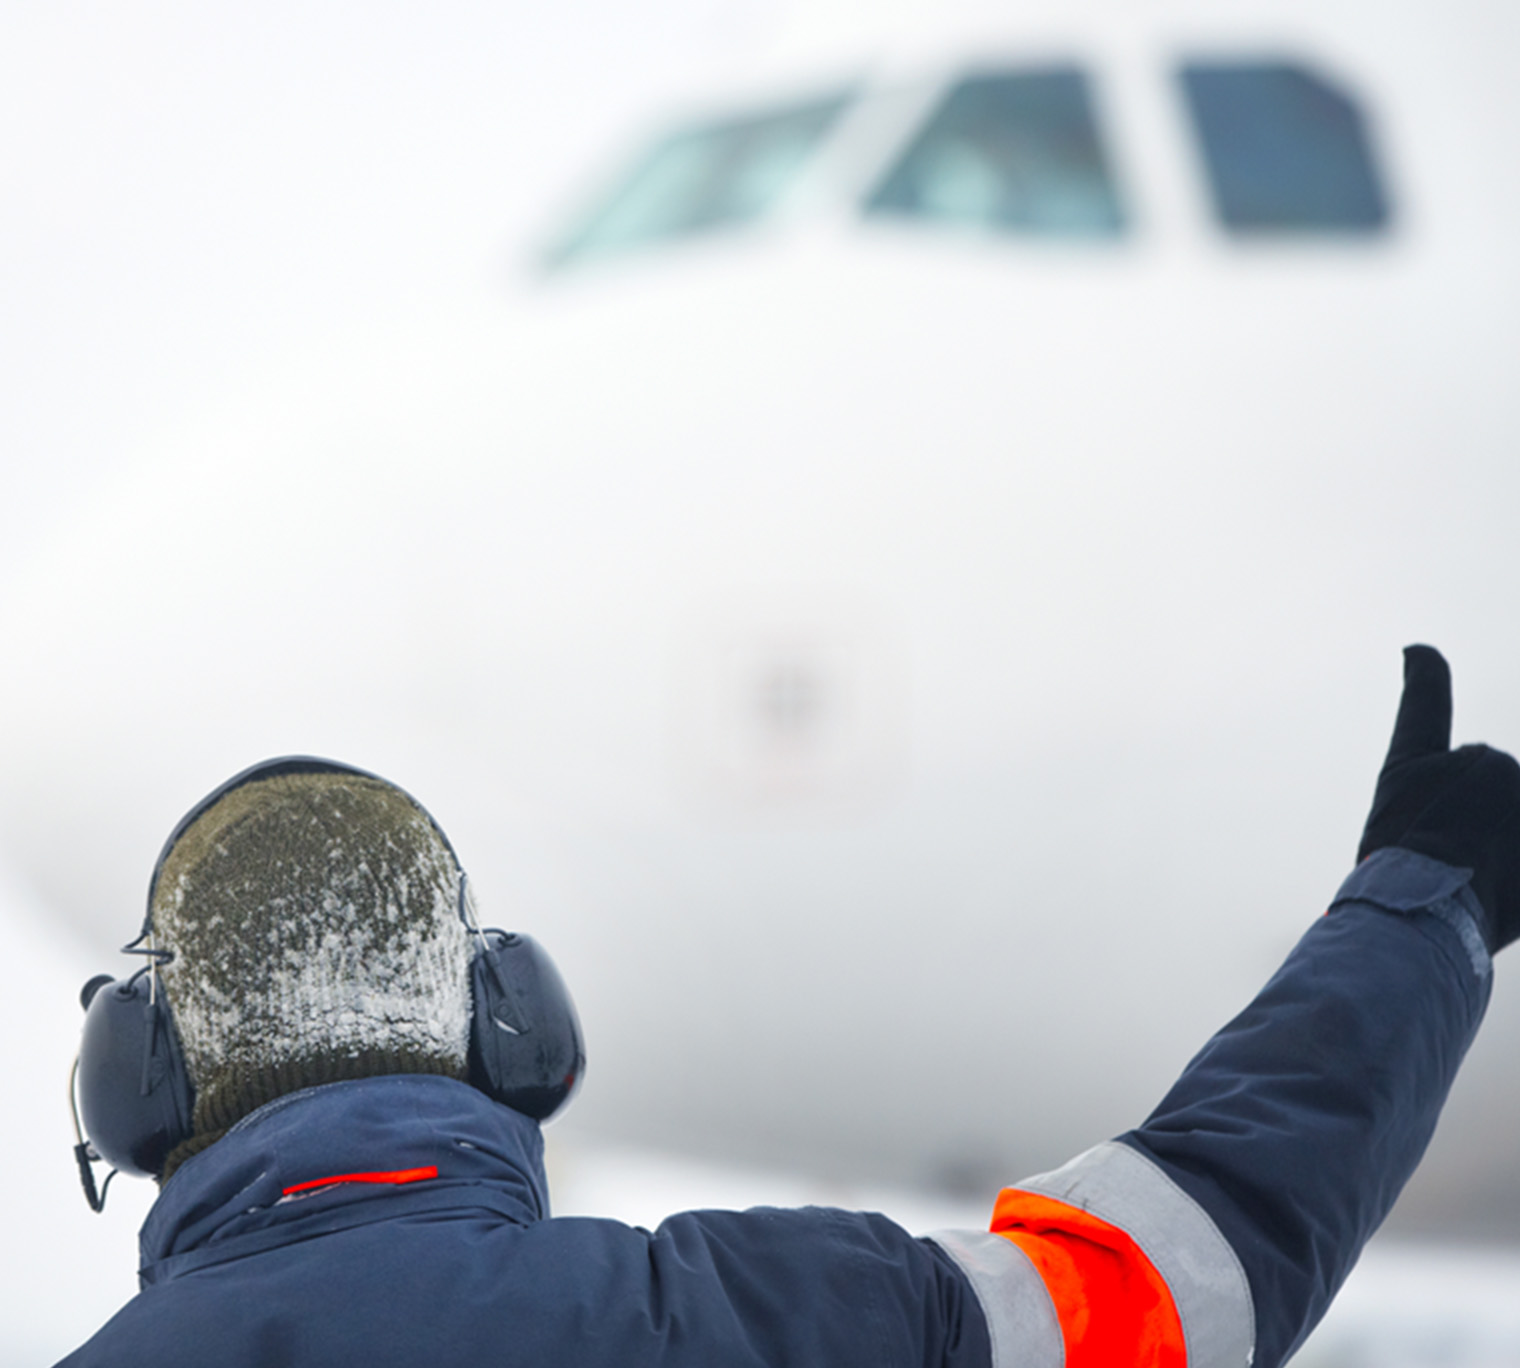 Member of ground crew showing OK sign to airplane pilot